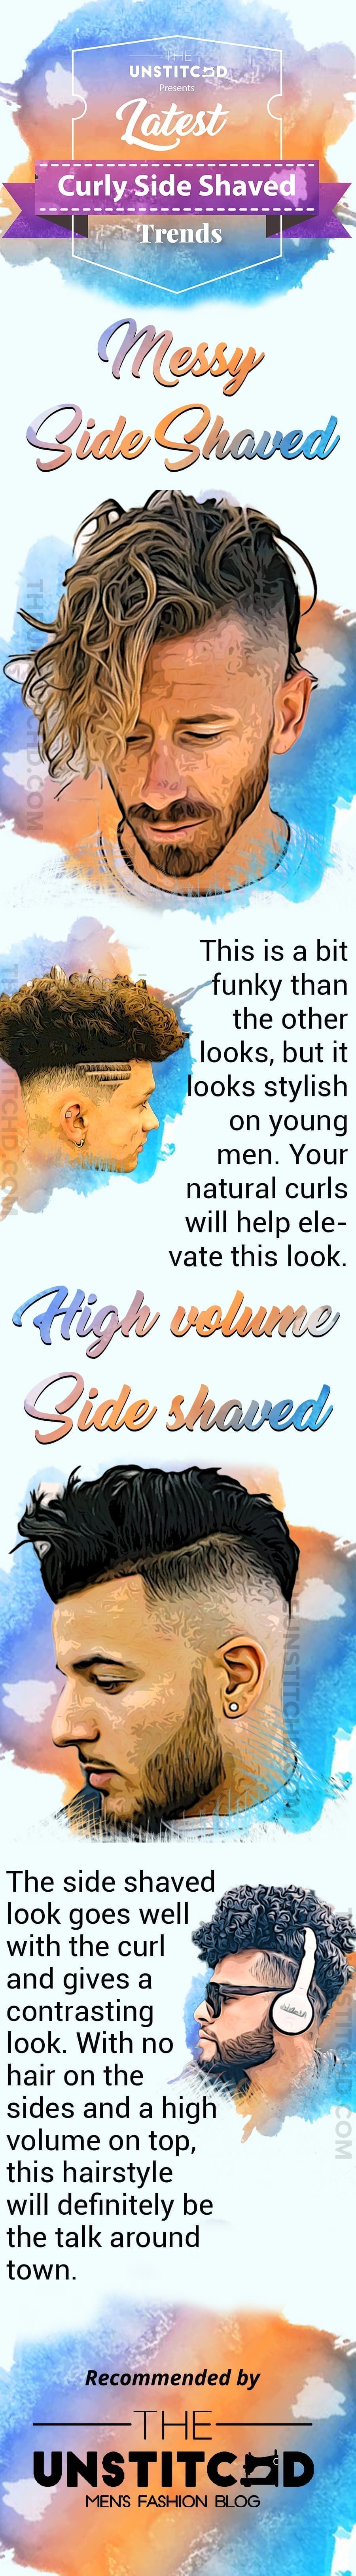 Side-shaved-curly-hairstyle-info